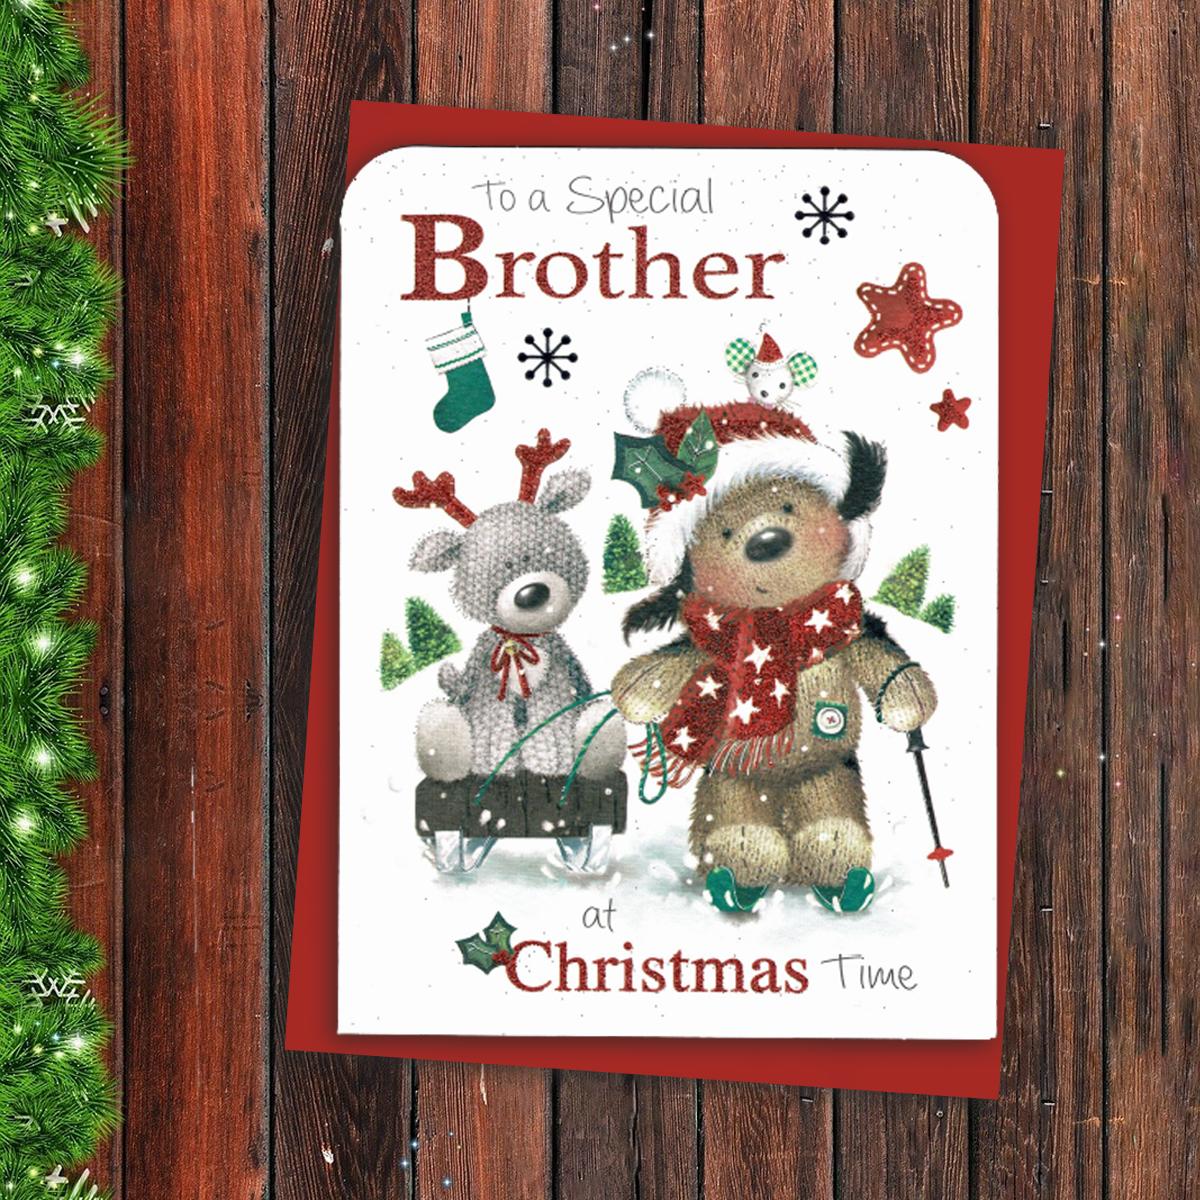 Brother Christmas Card Alongside Its Red Envelope